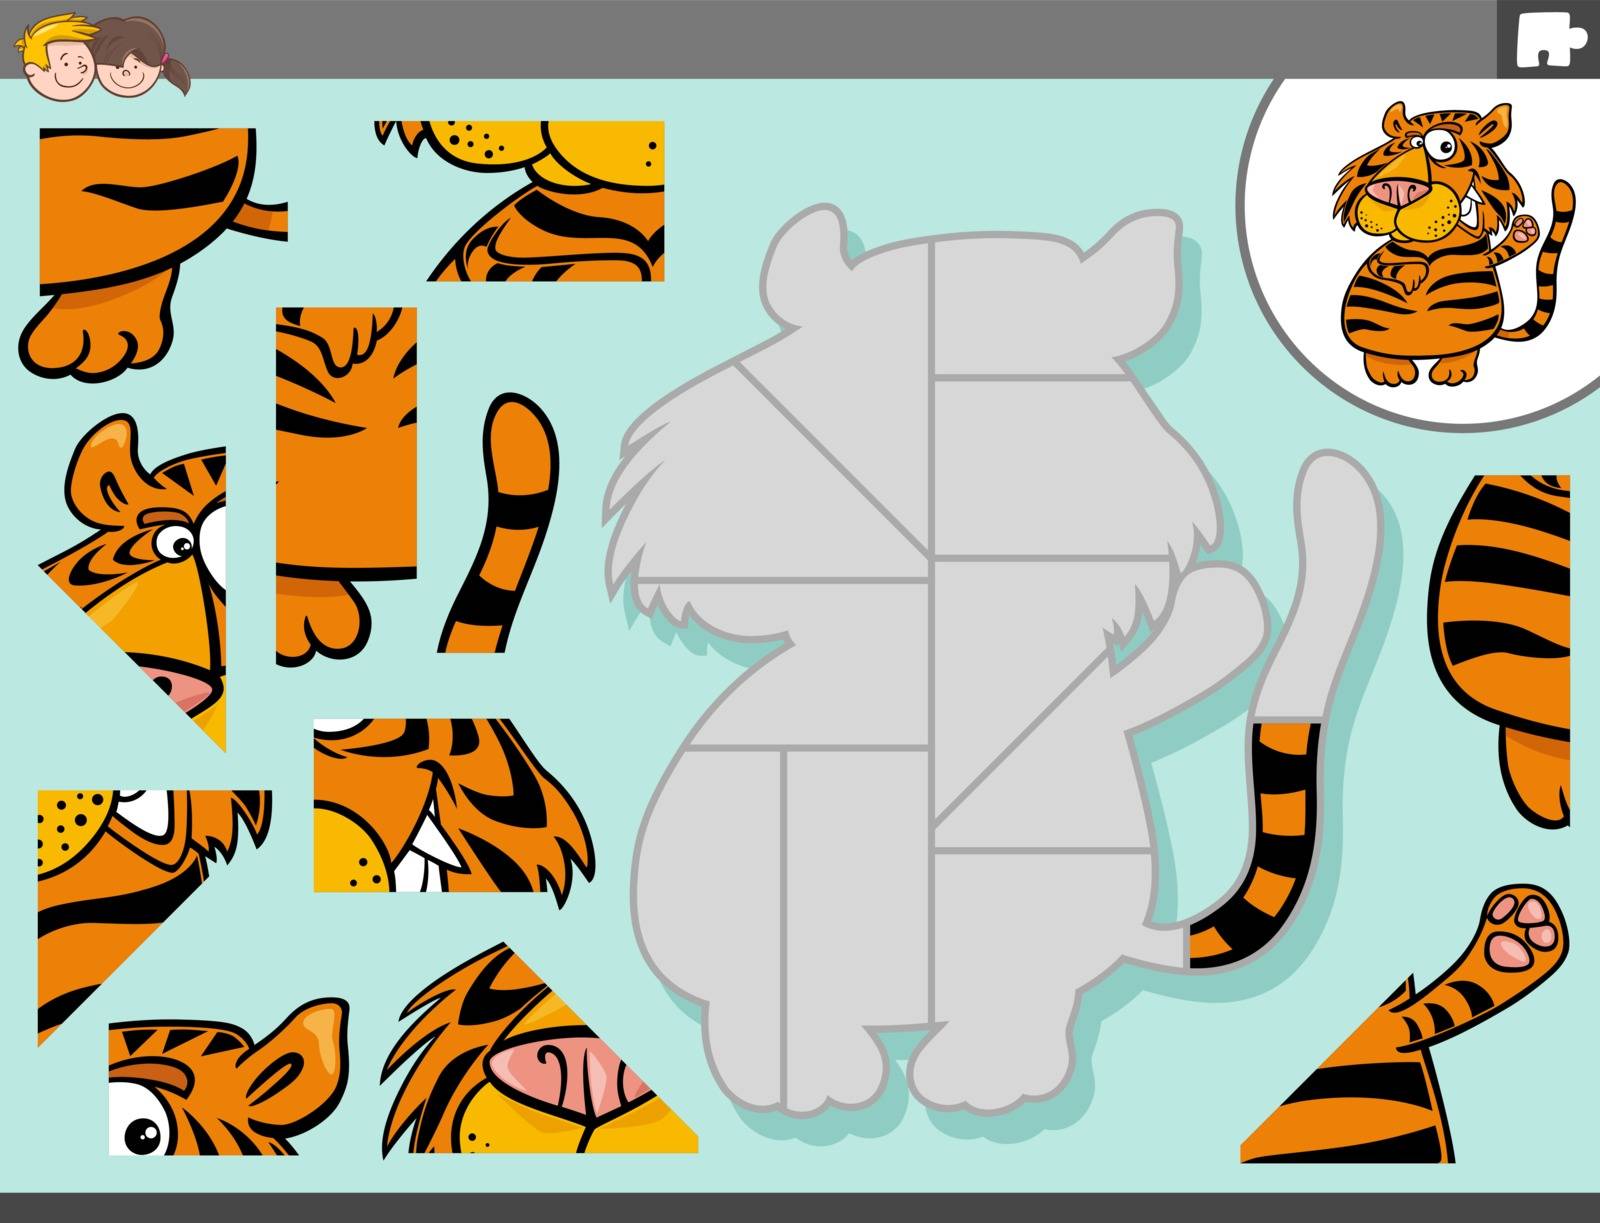 jigsaw puzzle game with tiger animal character by izakowski